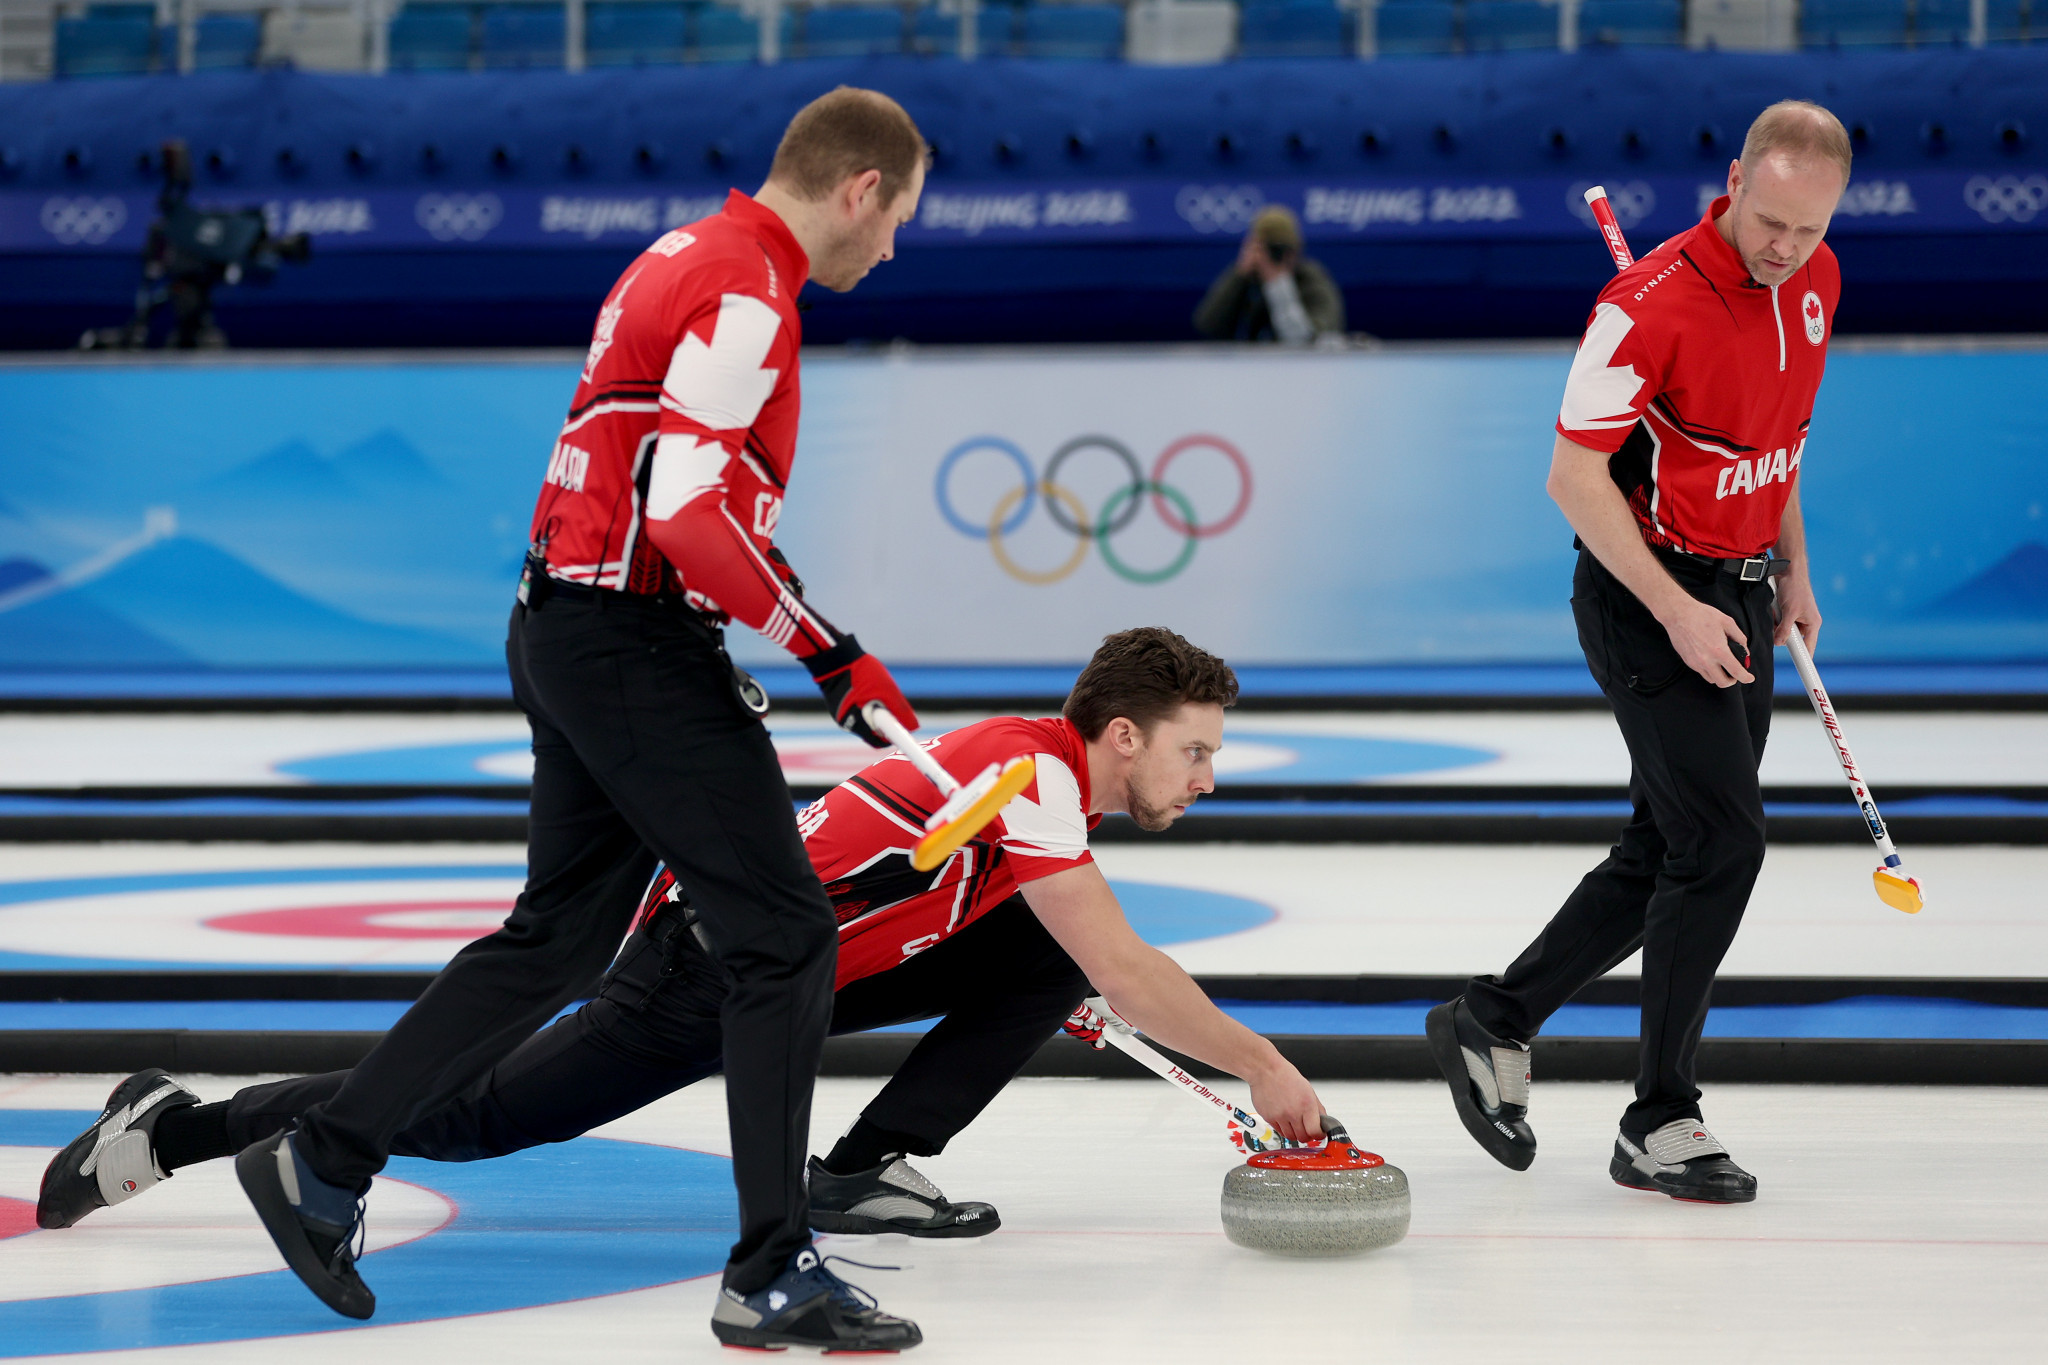 Canada is one of curling's leading nations, winning 12 medals since it became an Olympic sport ©Getty Images